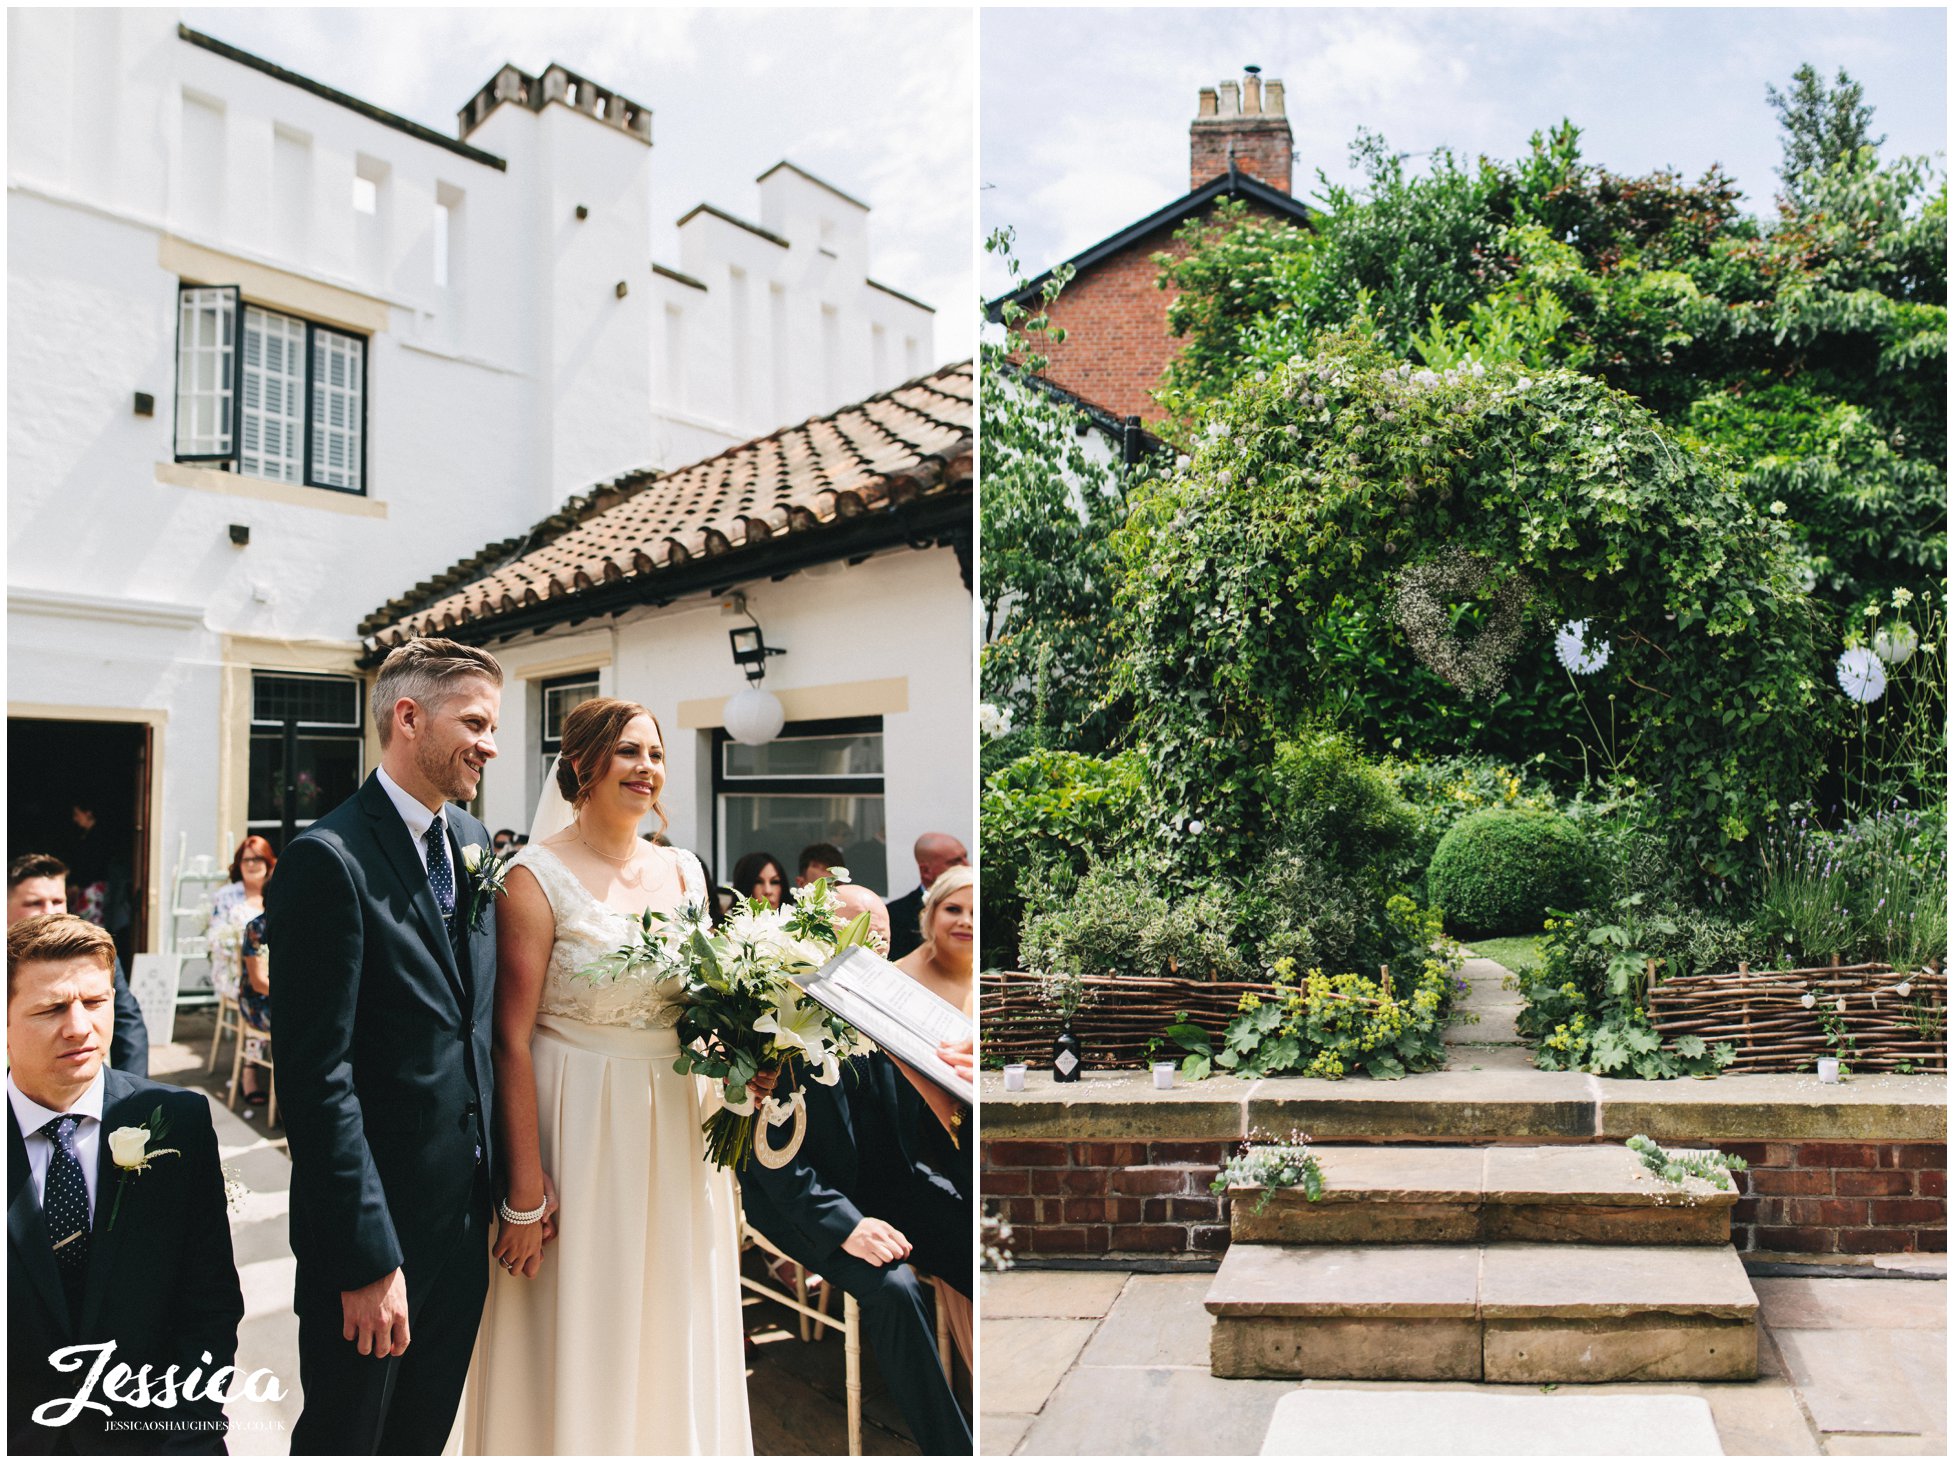 the bride & groom have their ceremony outdoors on the roof garden